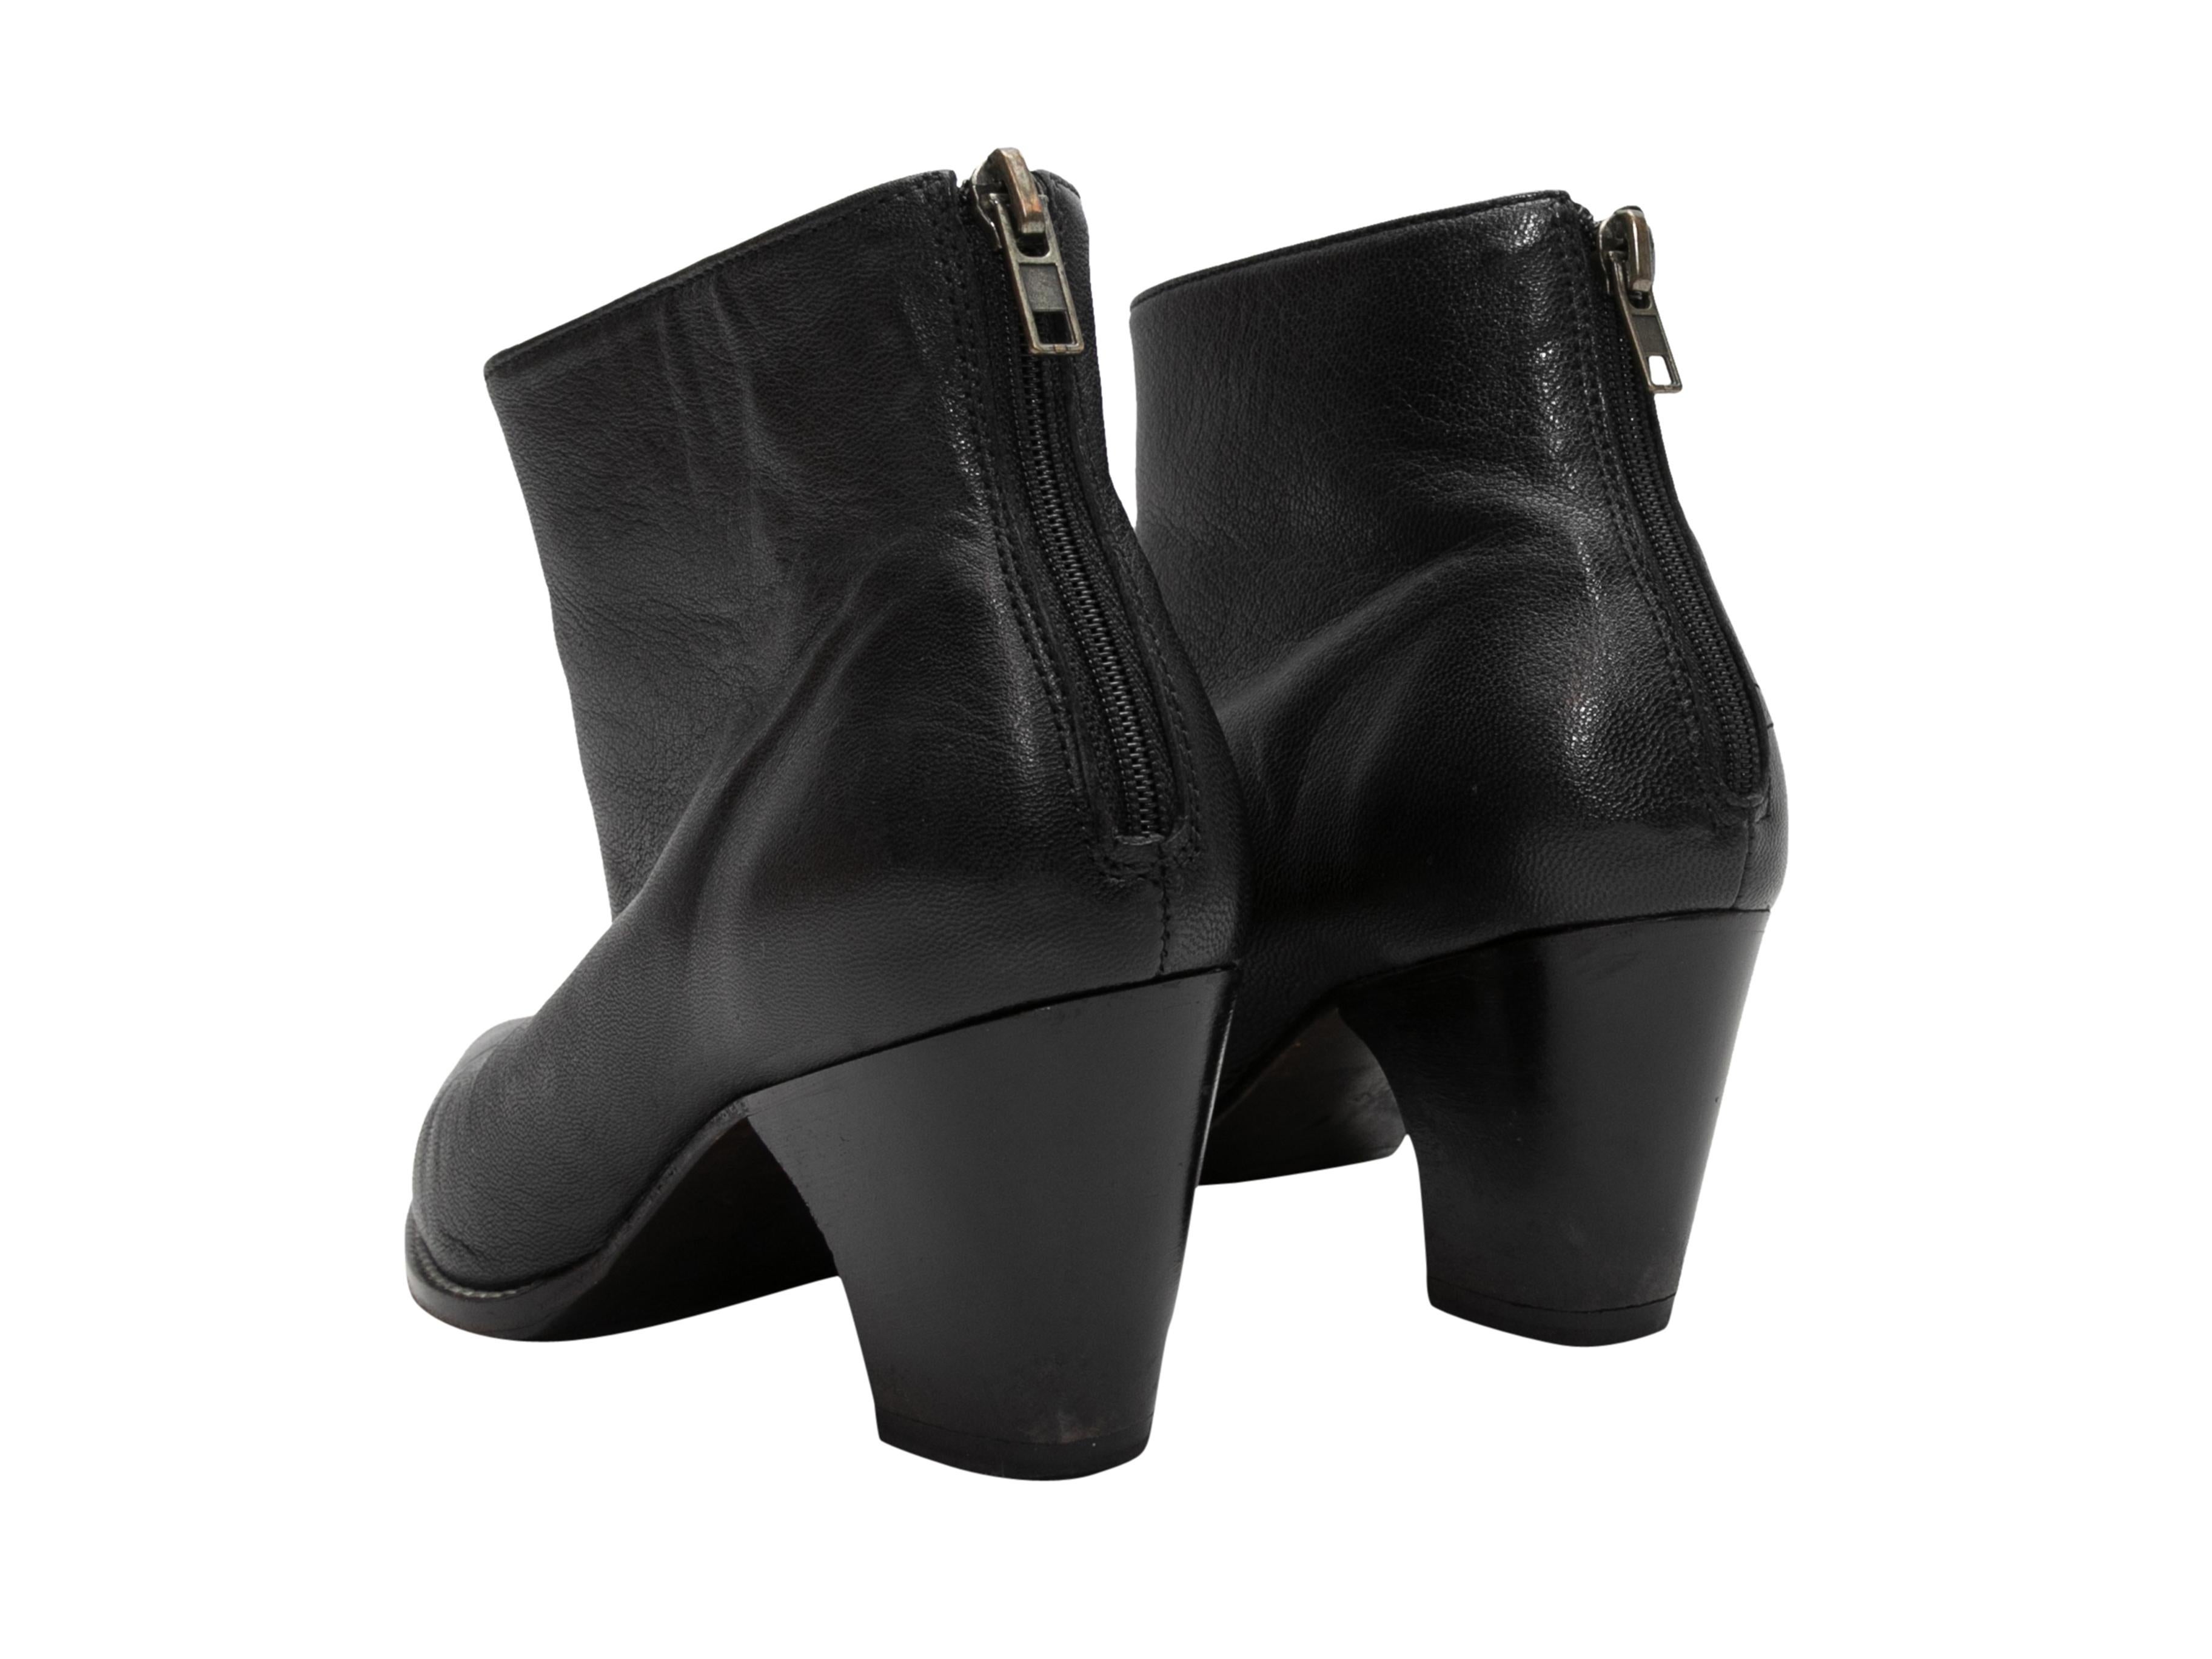 Women's or Men's Black Rachel Comey Pointed-Toe Ankle Boots Size 37 For Sale